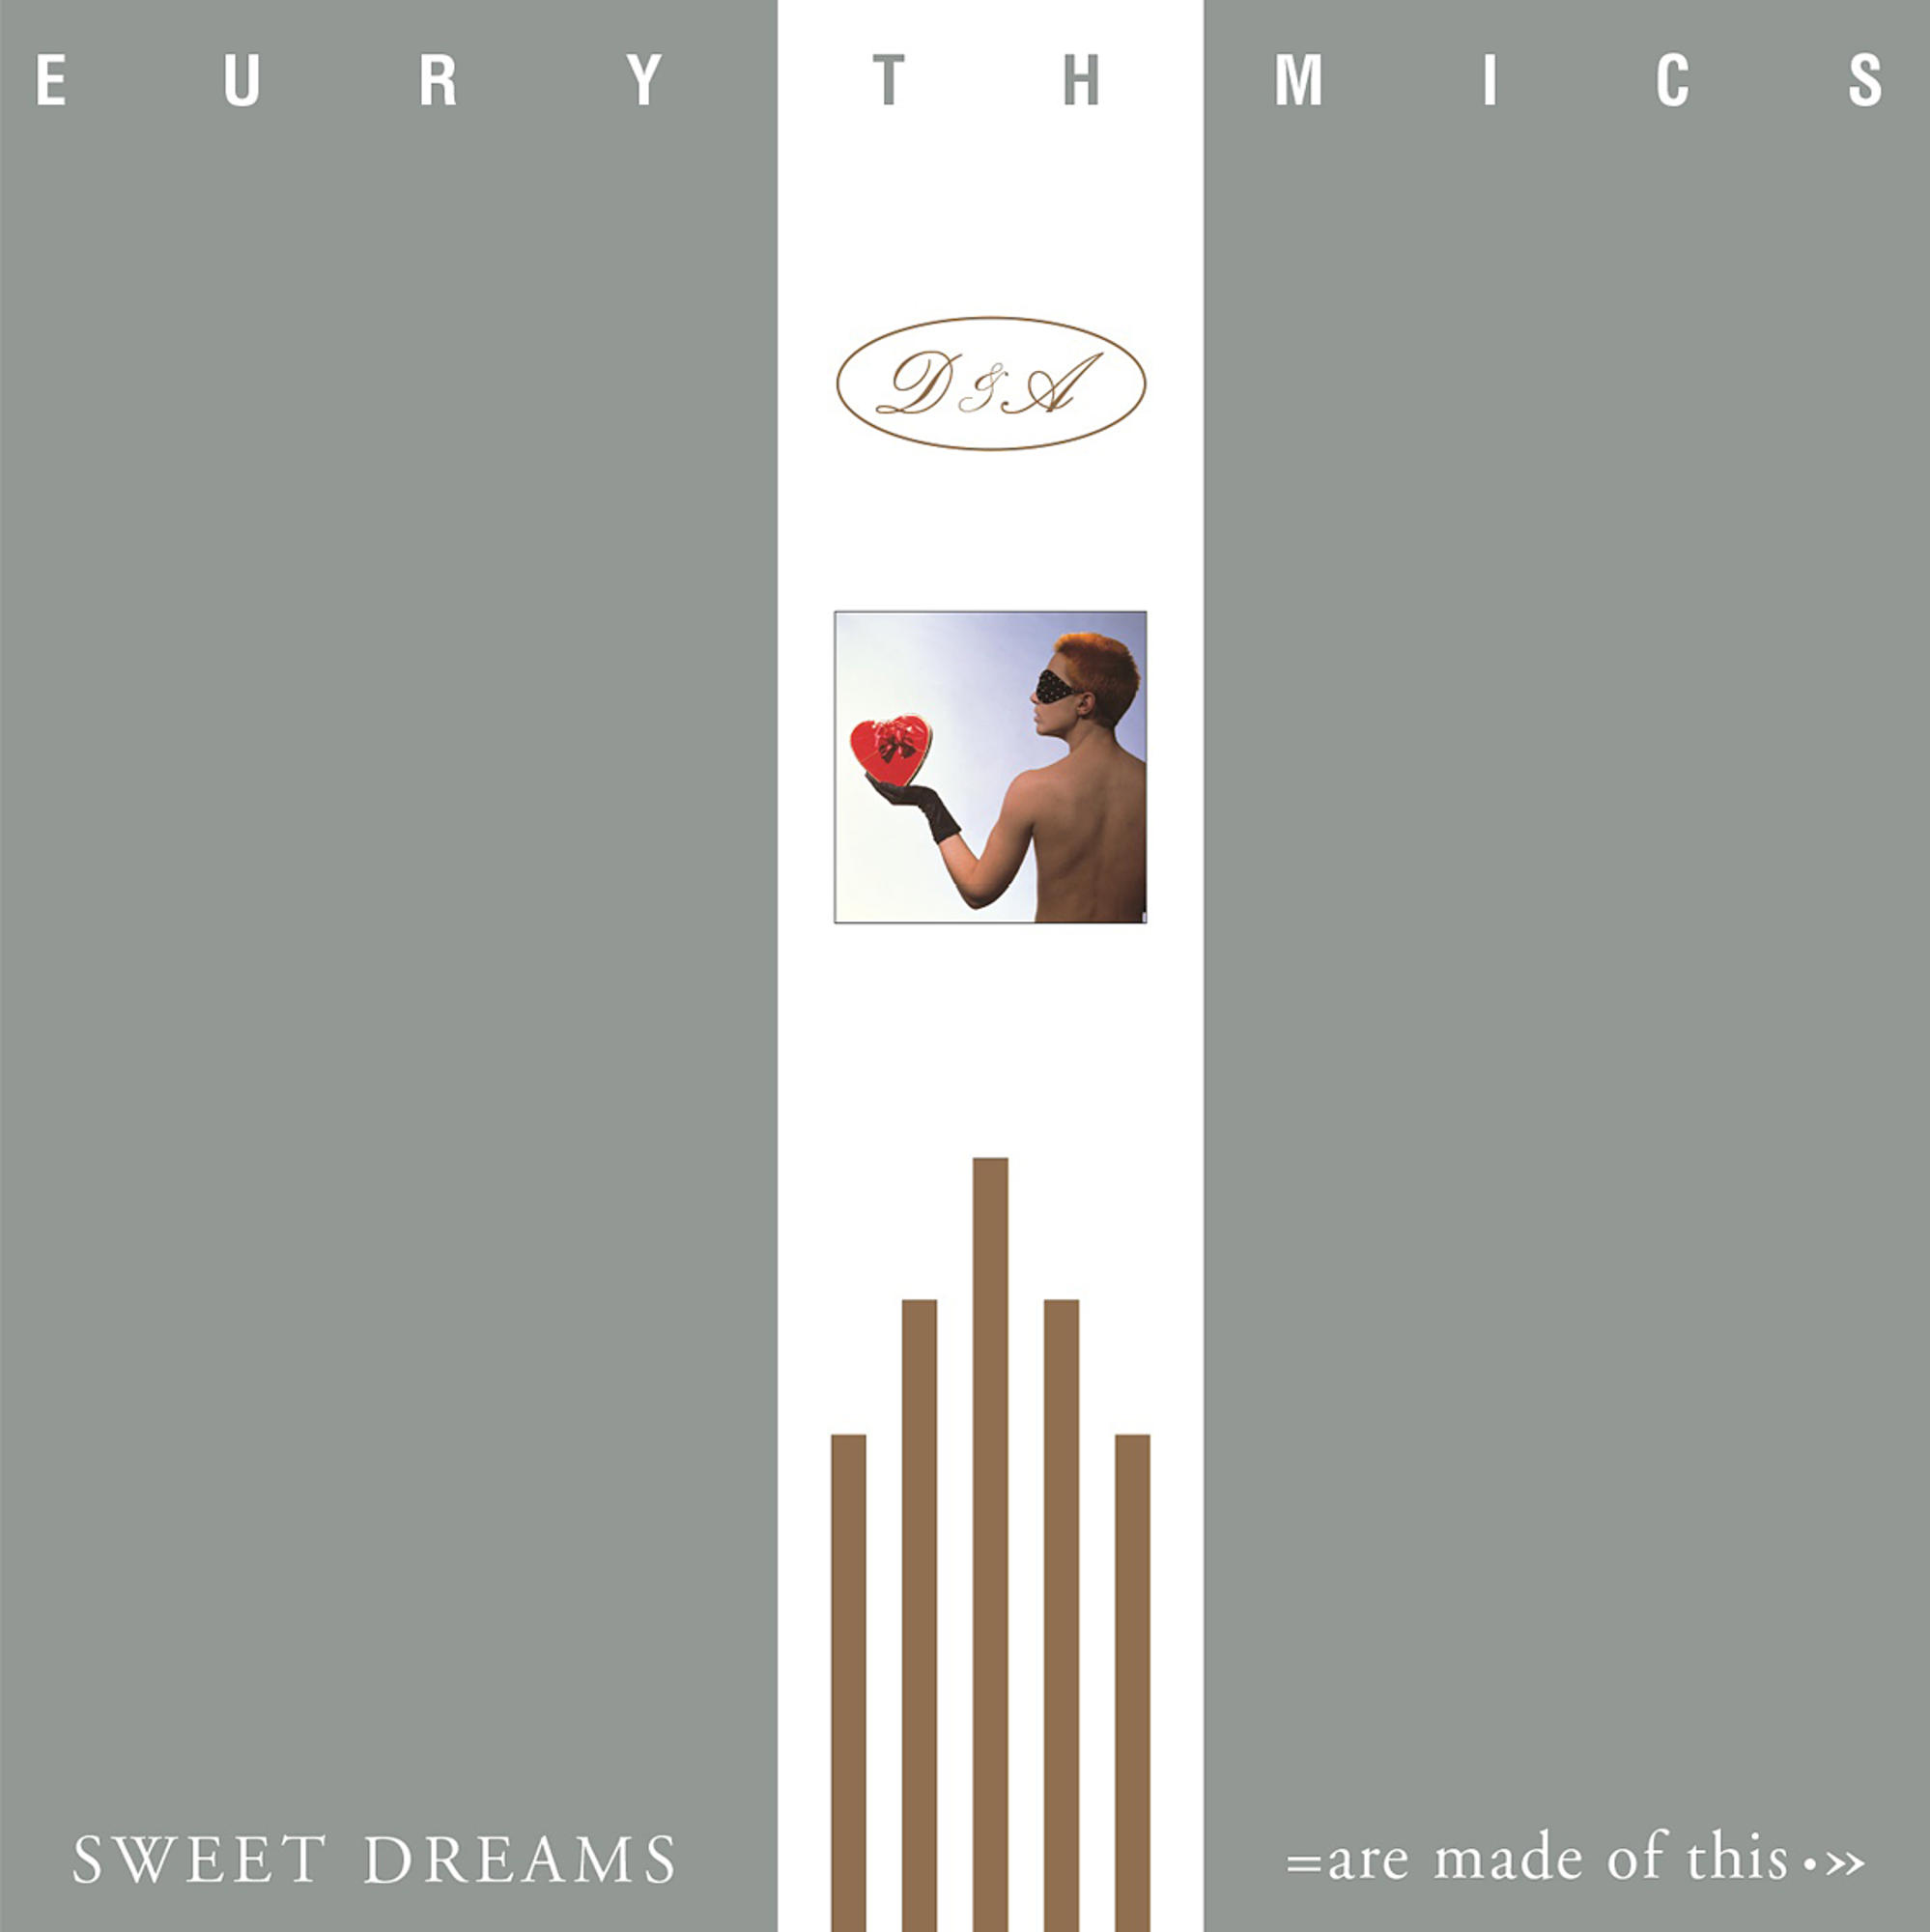 Eurythmics of (Vinyl) Dreams Sweet Made (Are This) - -